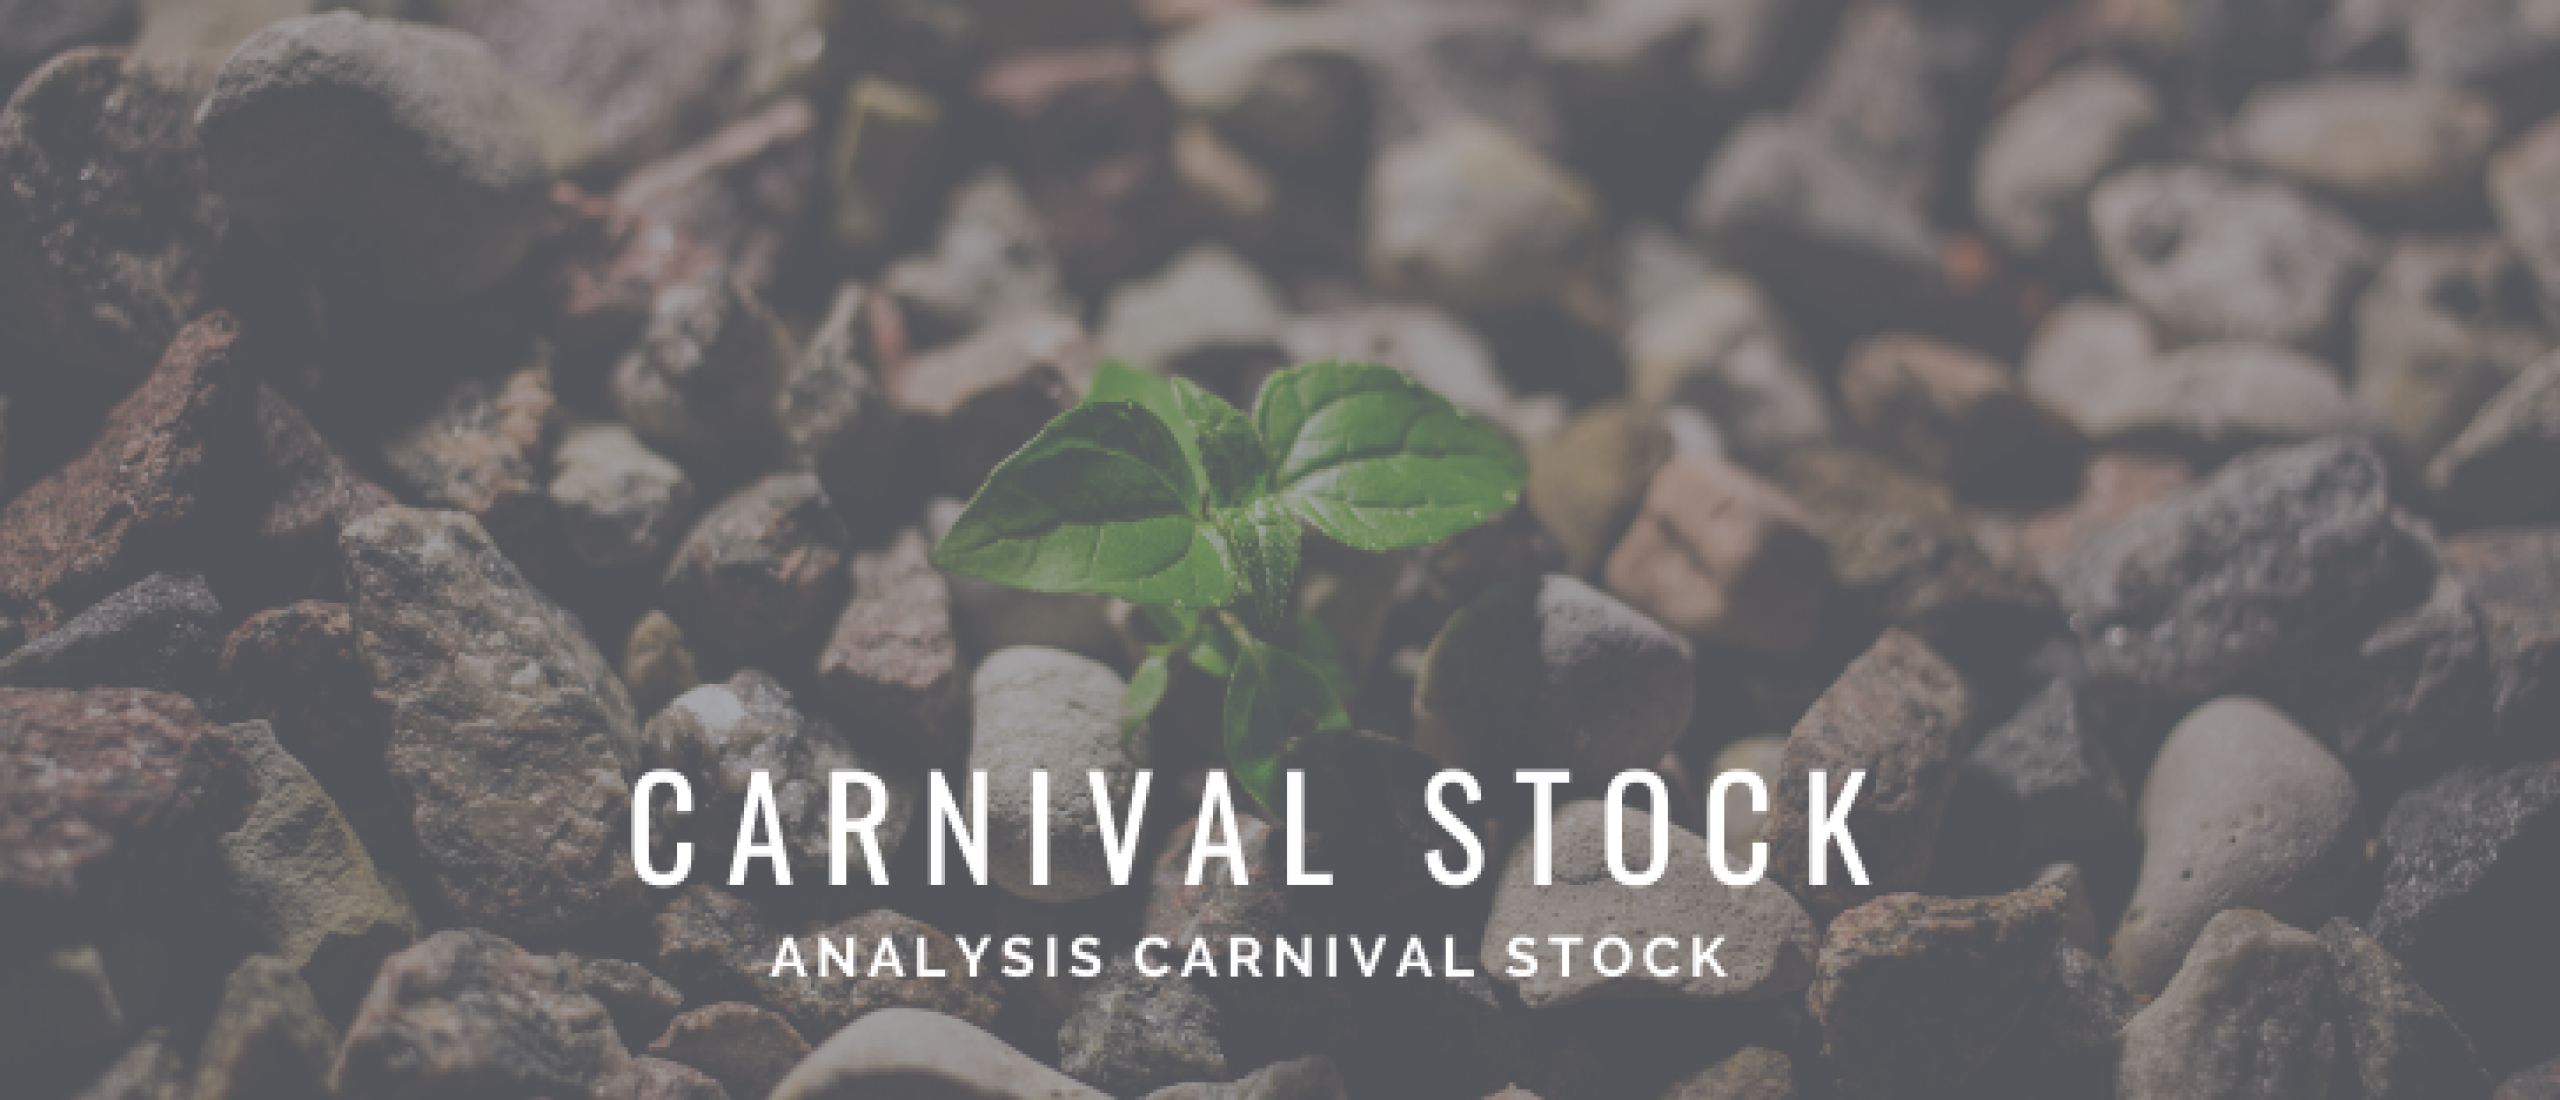 Buy Carnival Stock or not? Analysis and Price Target [2022]